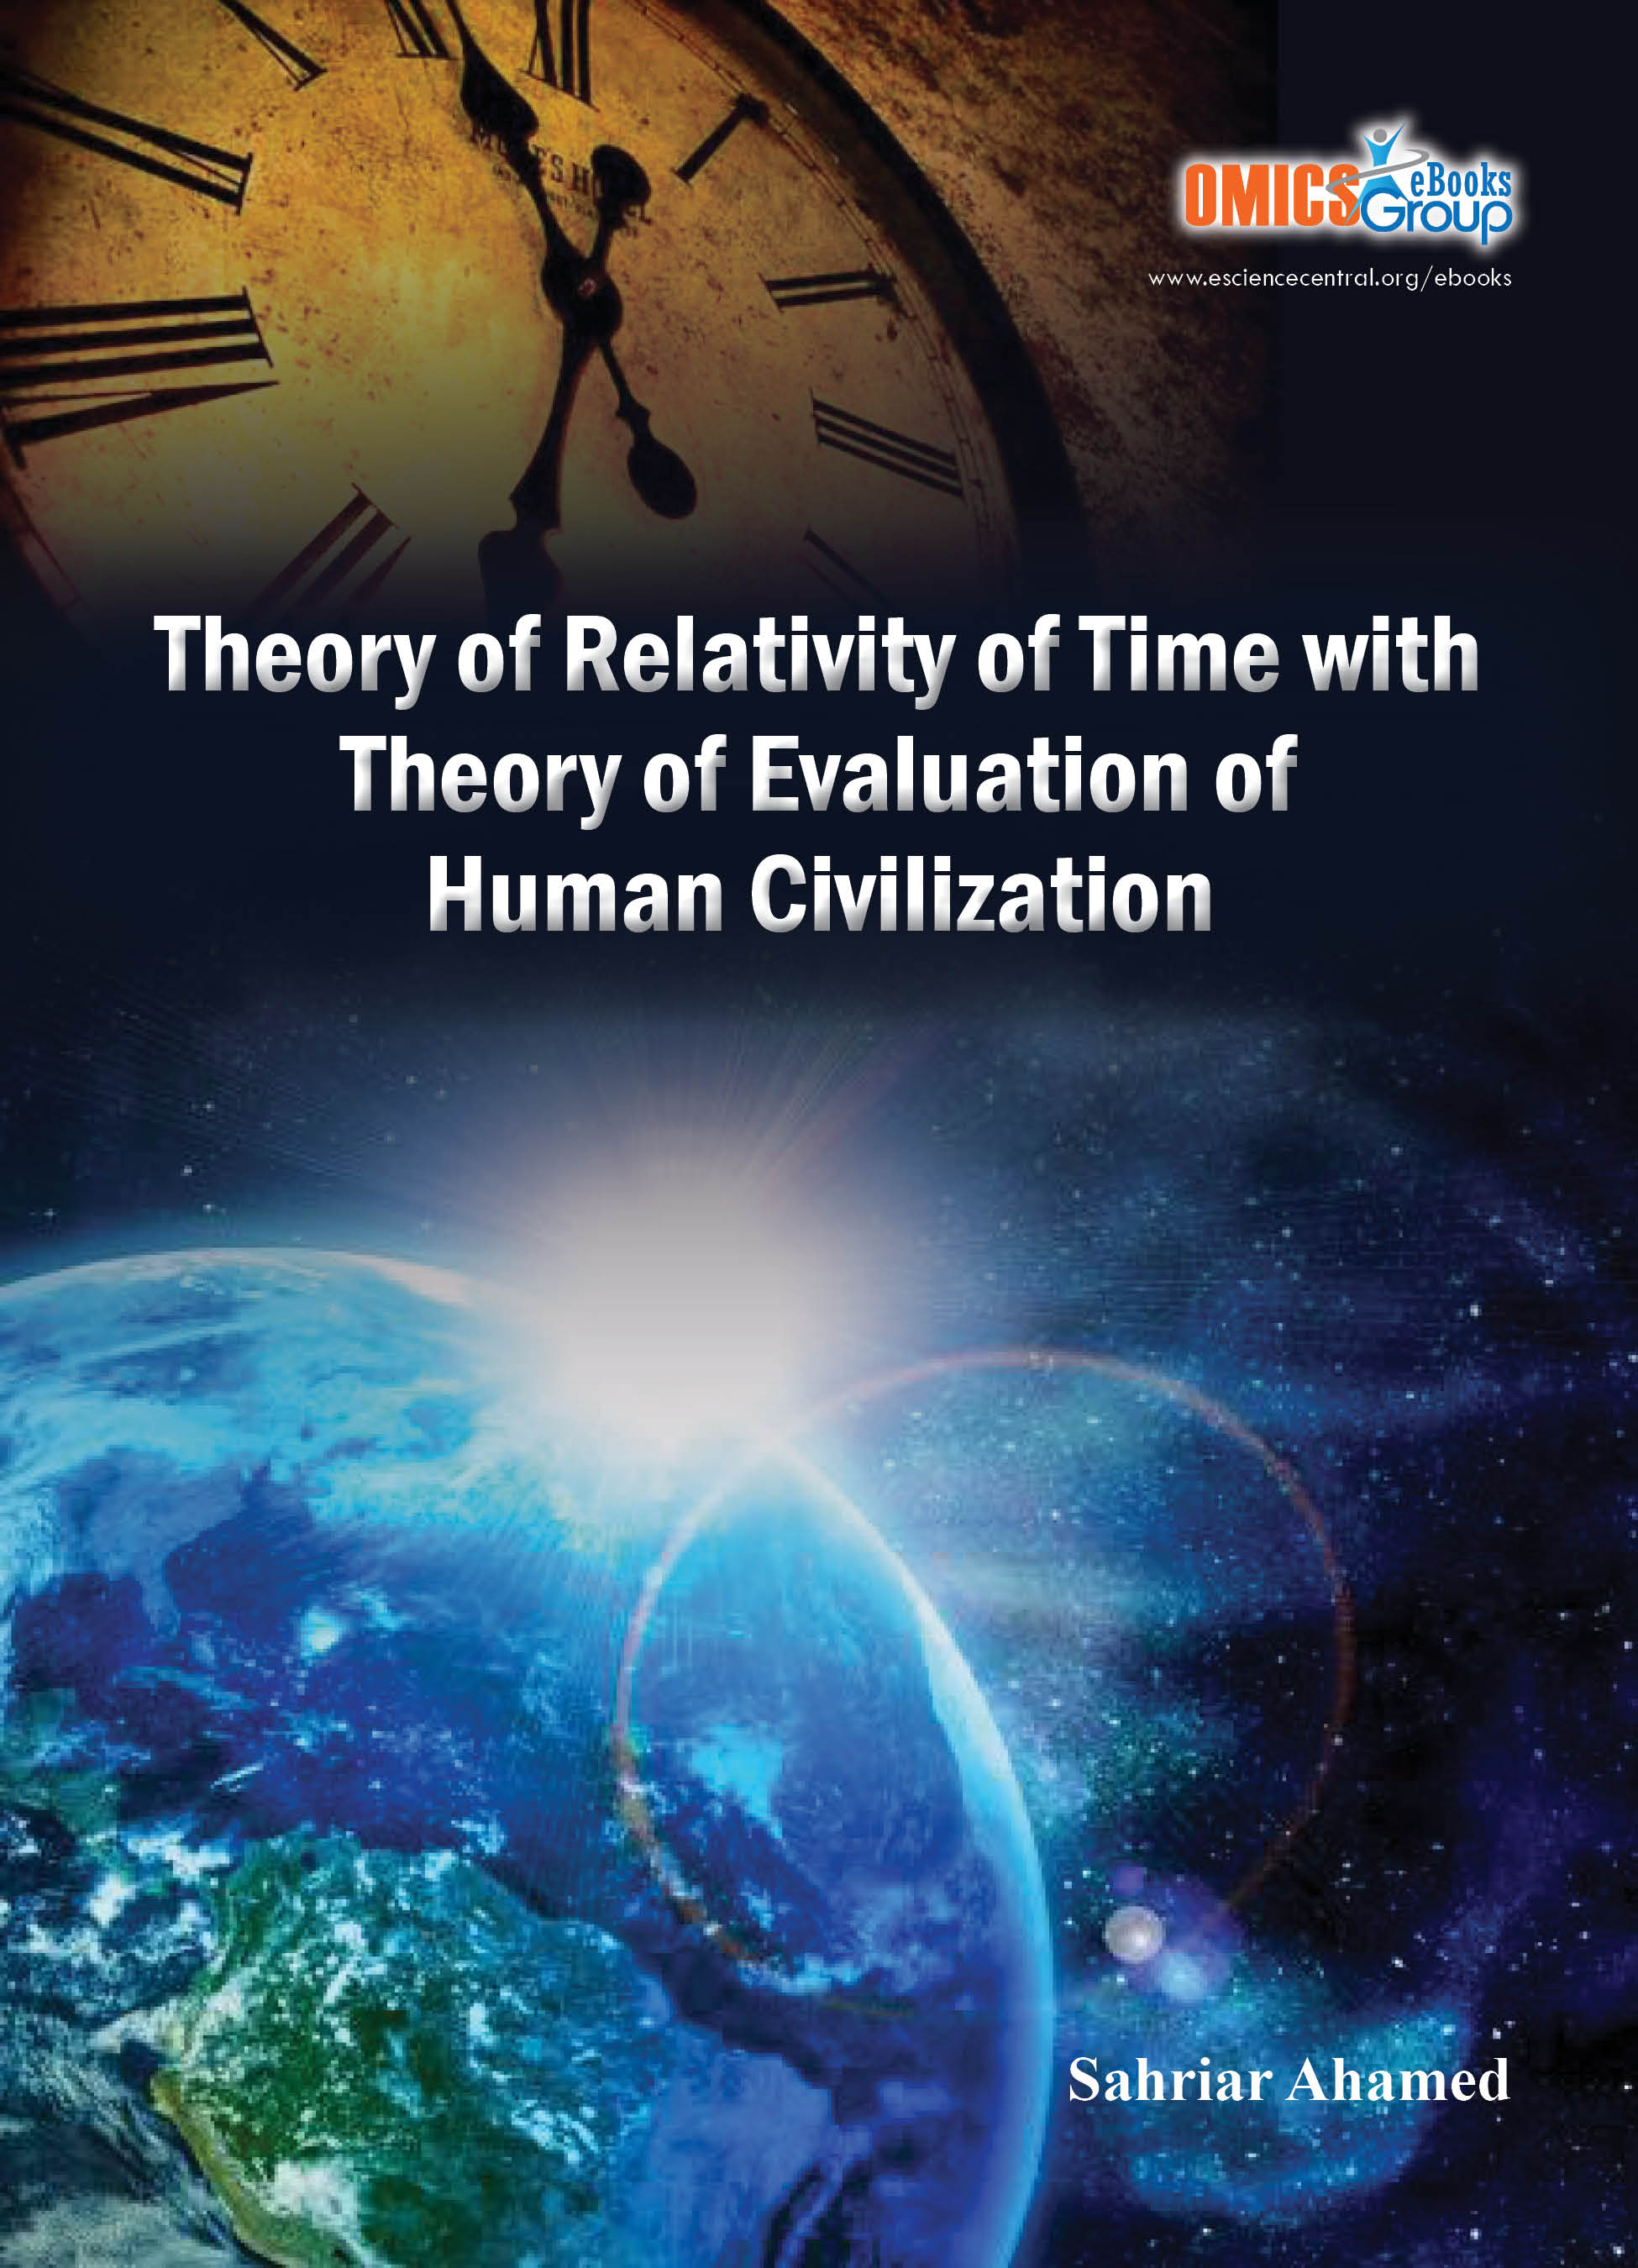 Theory of Relativity of Time with Theory of Evaluation of Human Civilization